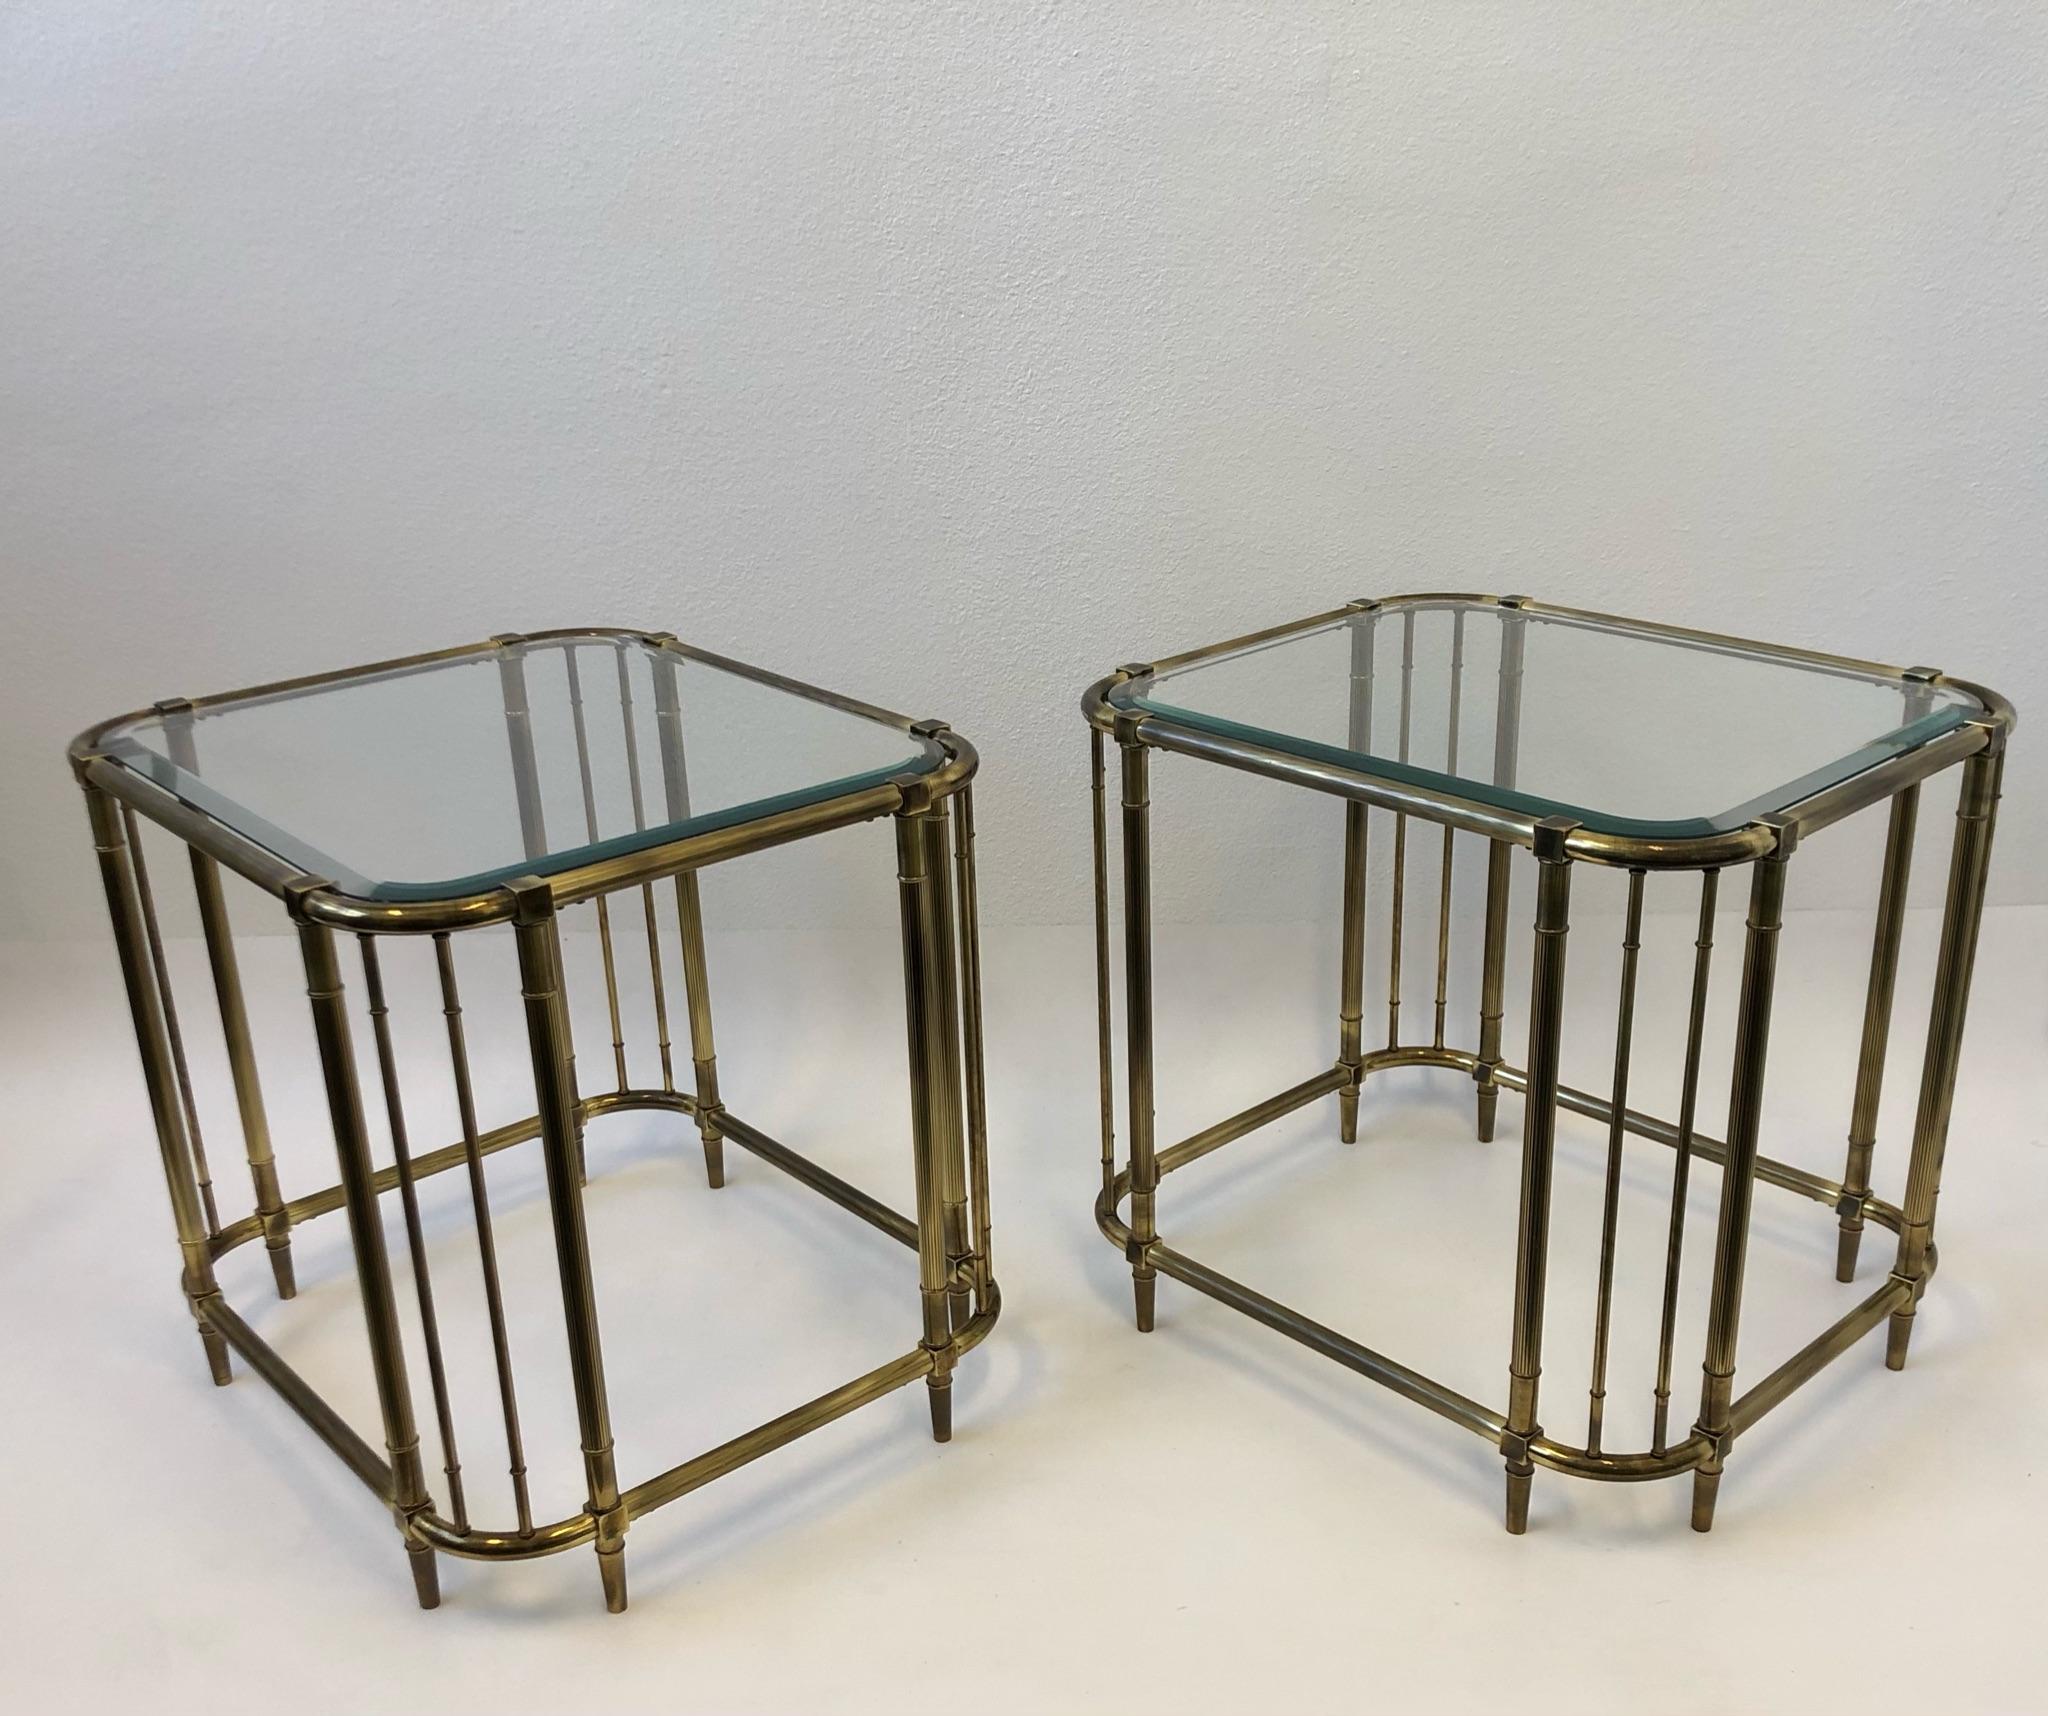 Late 20th Century Pair of Aged Brass and Glass Side Tables by Mastercraft